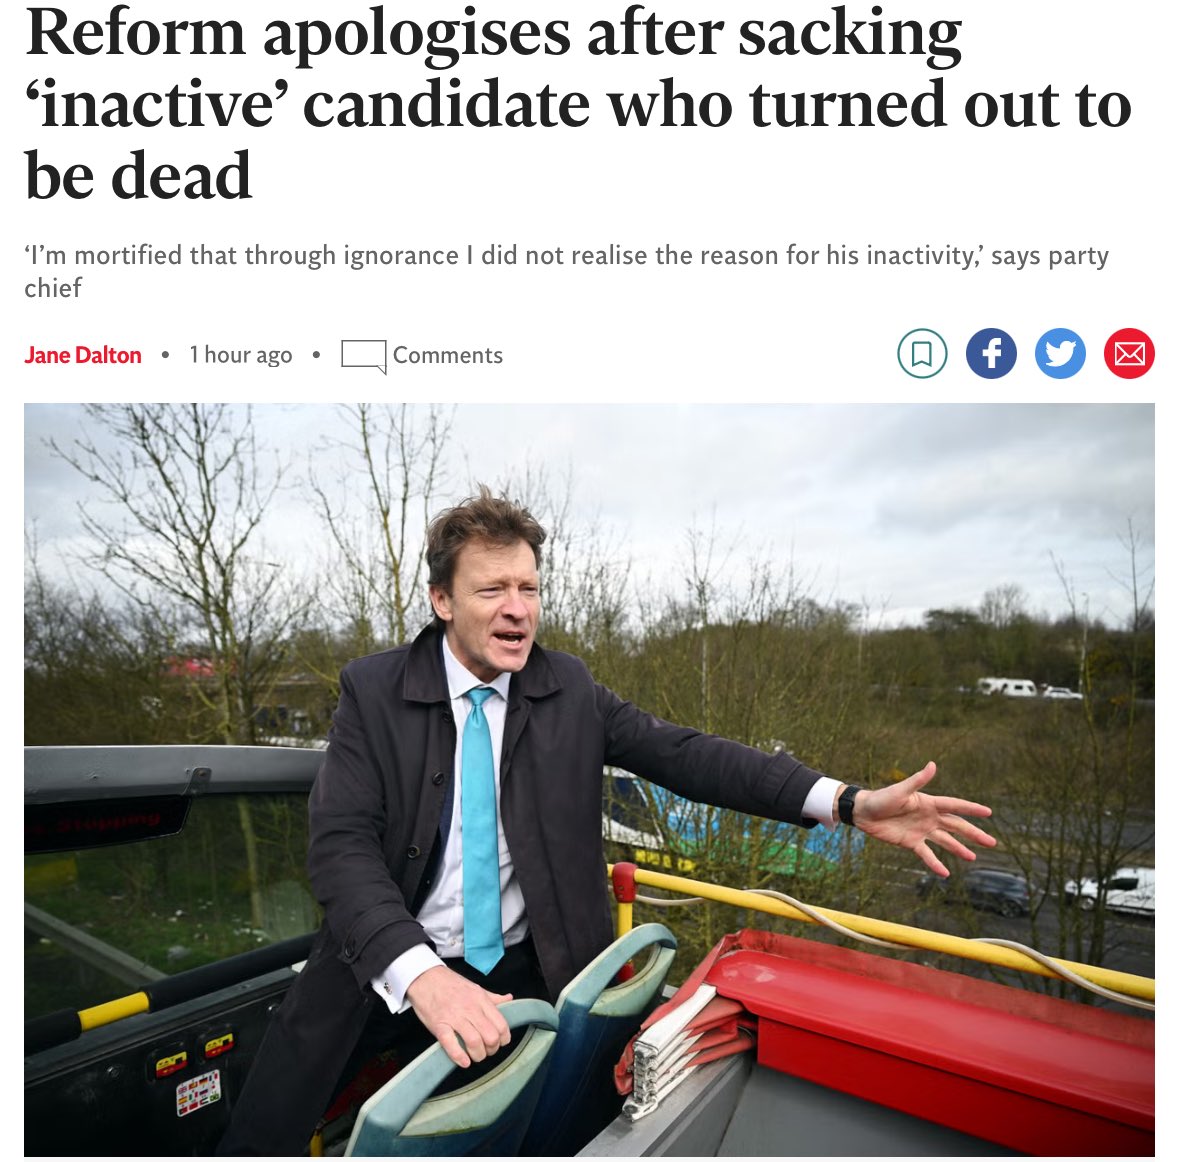 If you think it's difficult to tell whether Reform's candidates are dead, just wait until you see the people who vote for them...